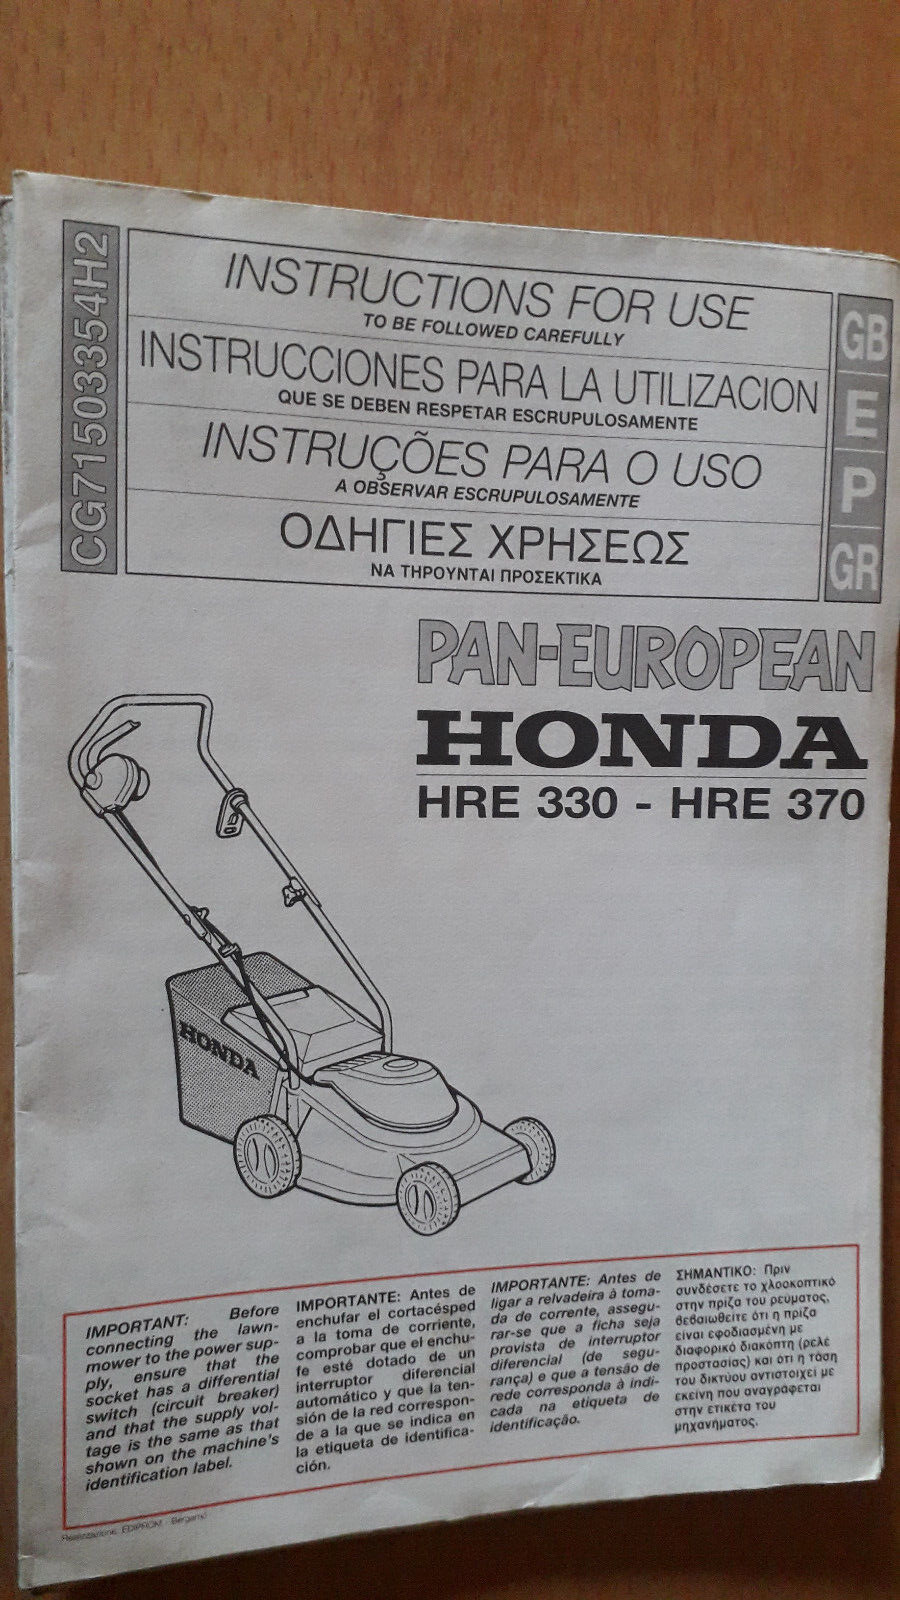 Honda HRE330 Electric Mower - HRE370: Instructions for Use